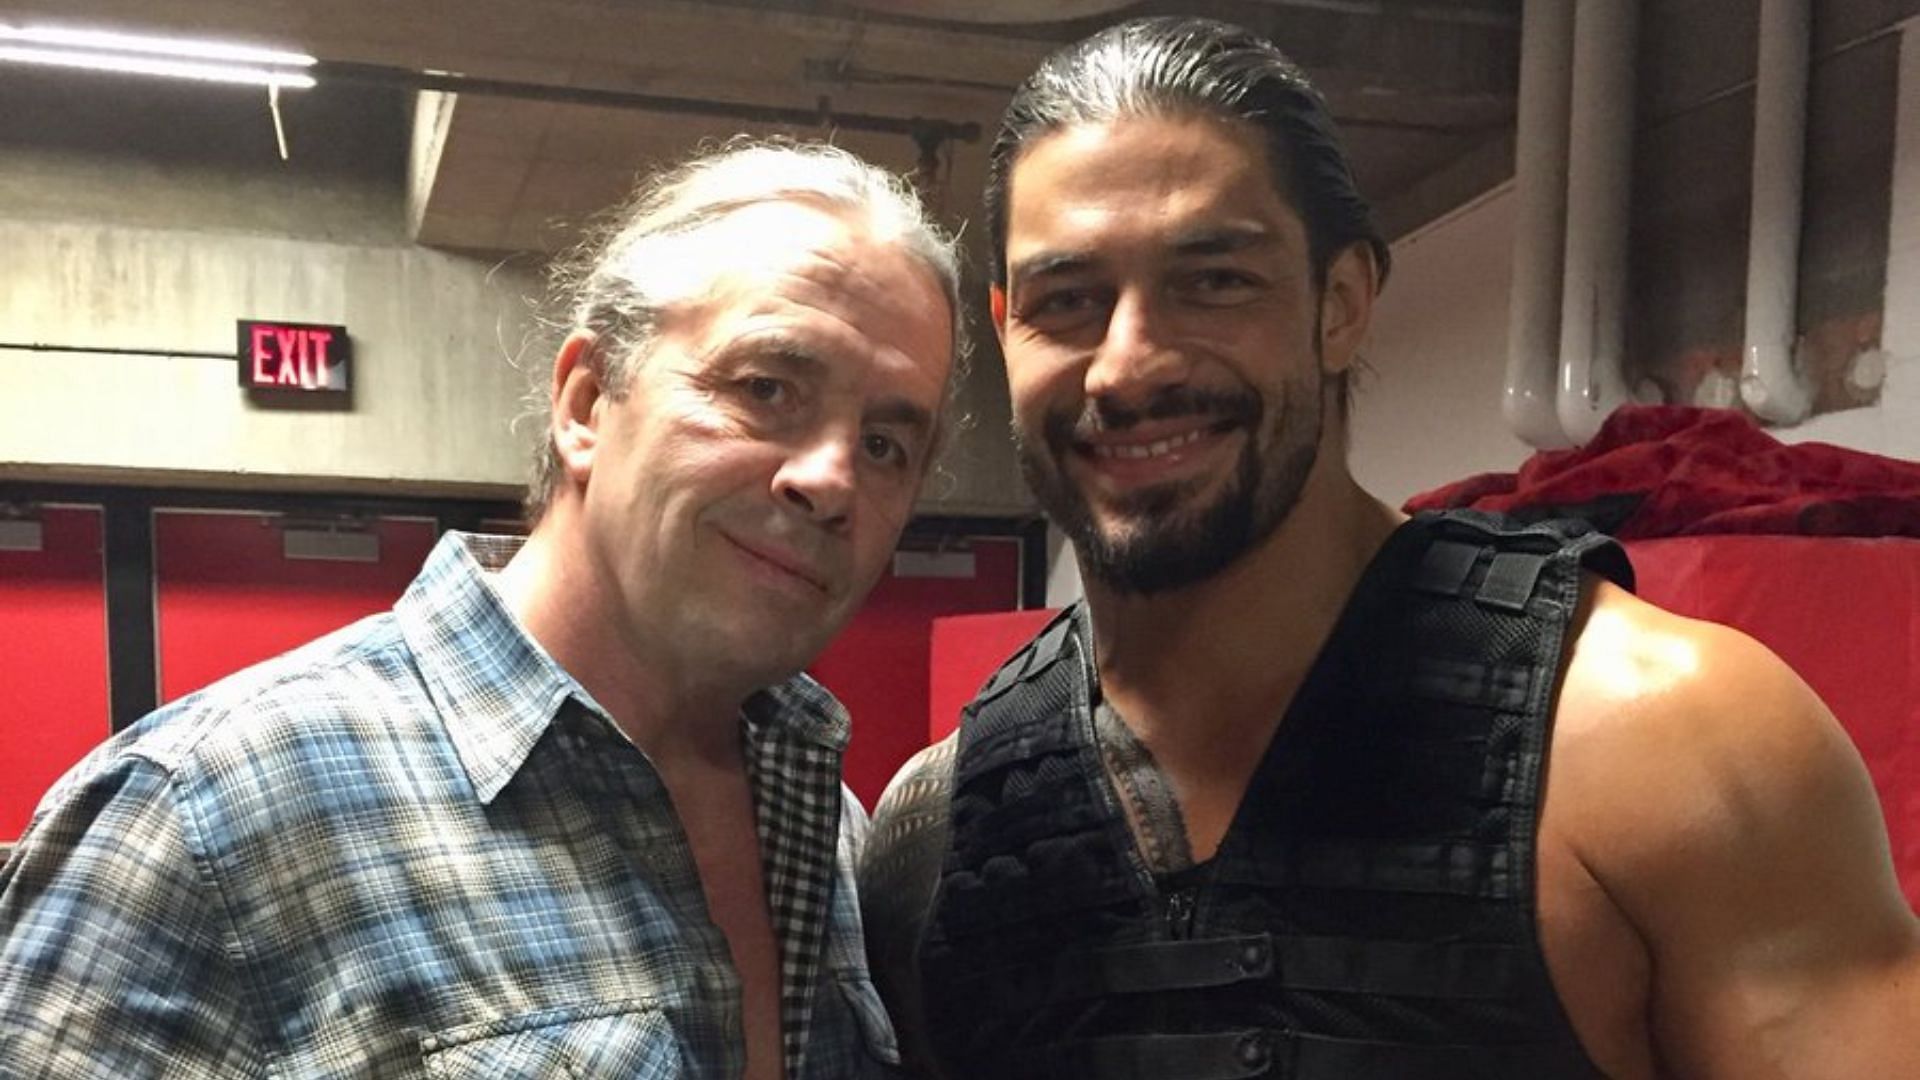 Bret Hart (left) and Roman Reigns (right)